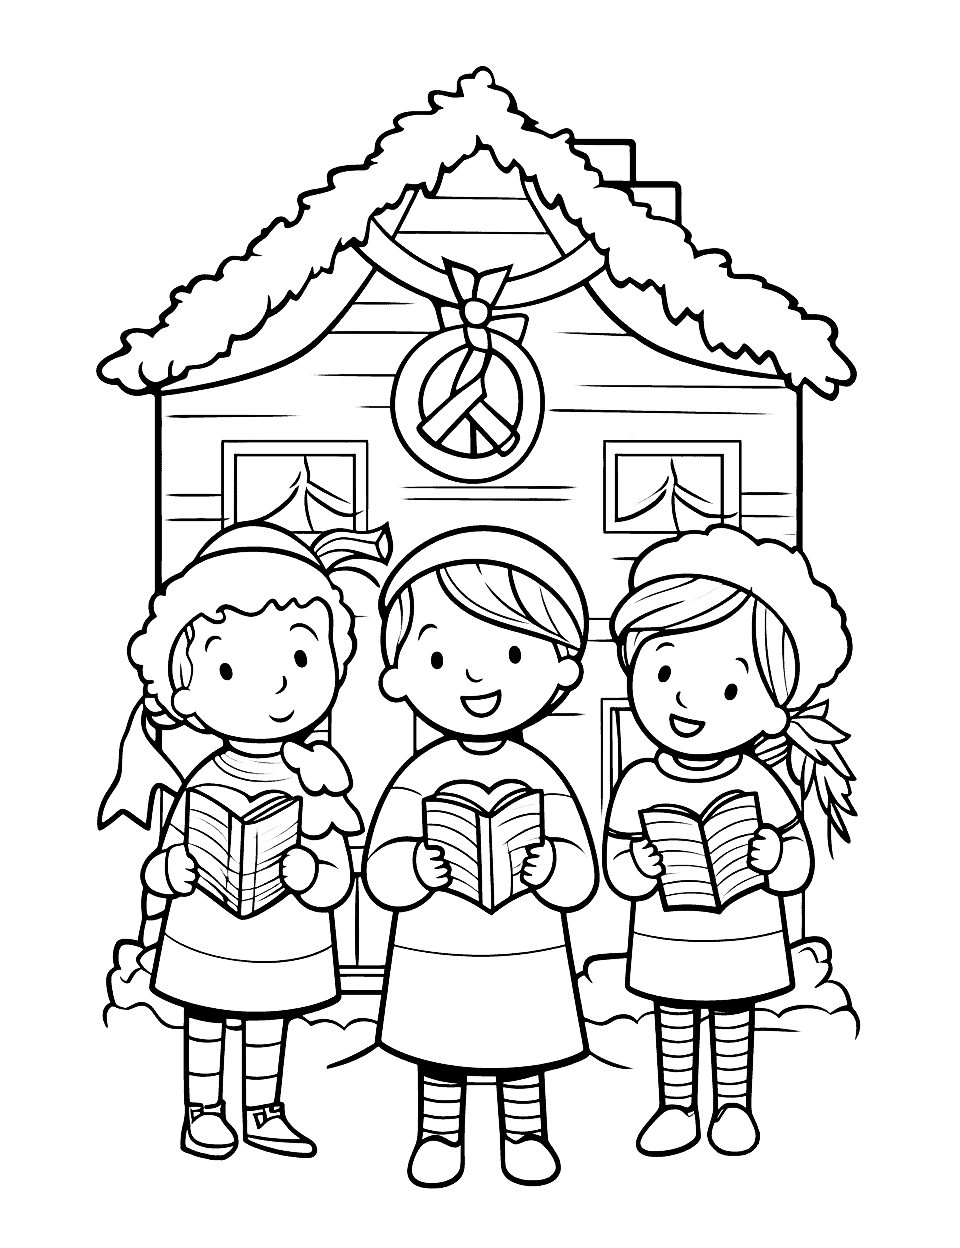 Christmas Carol Singers Coloring Page - Carolers singing festive songs in front of a decorated house.